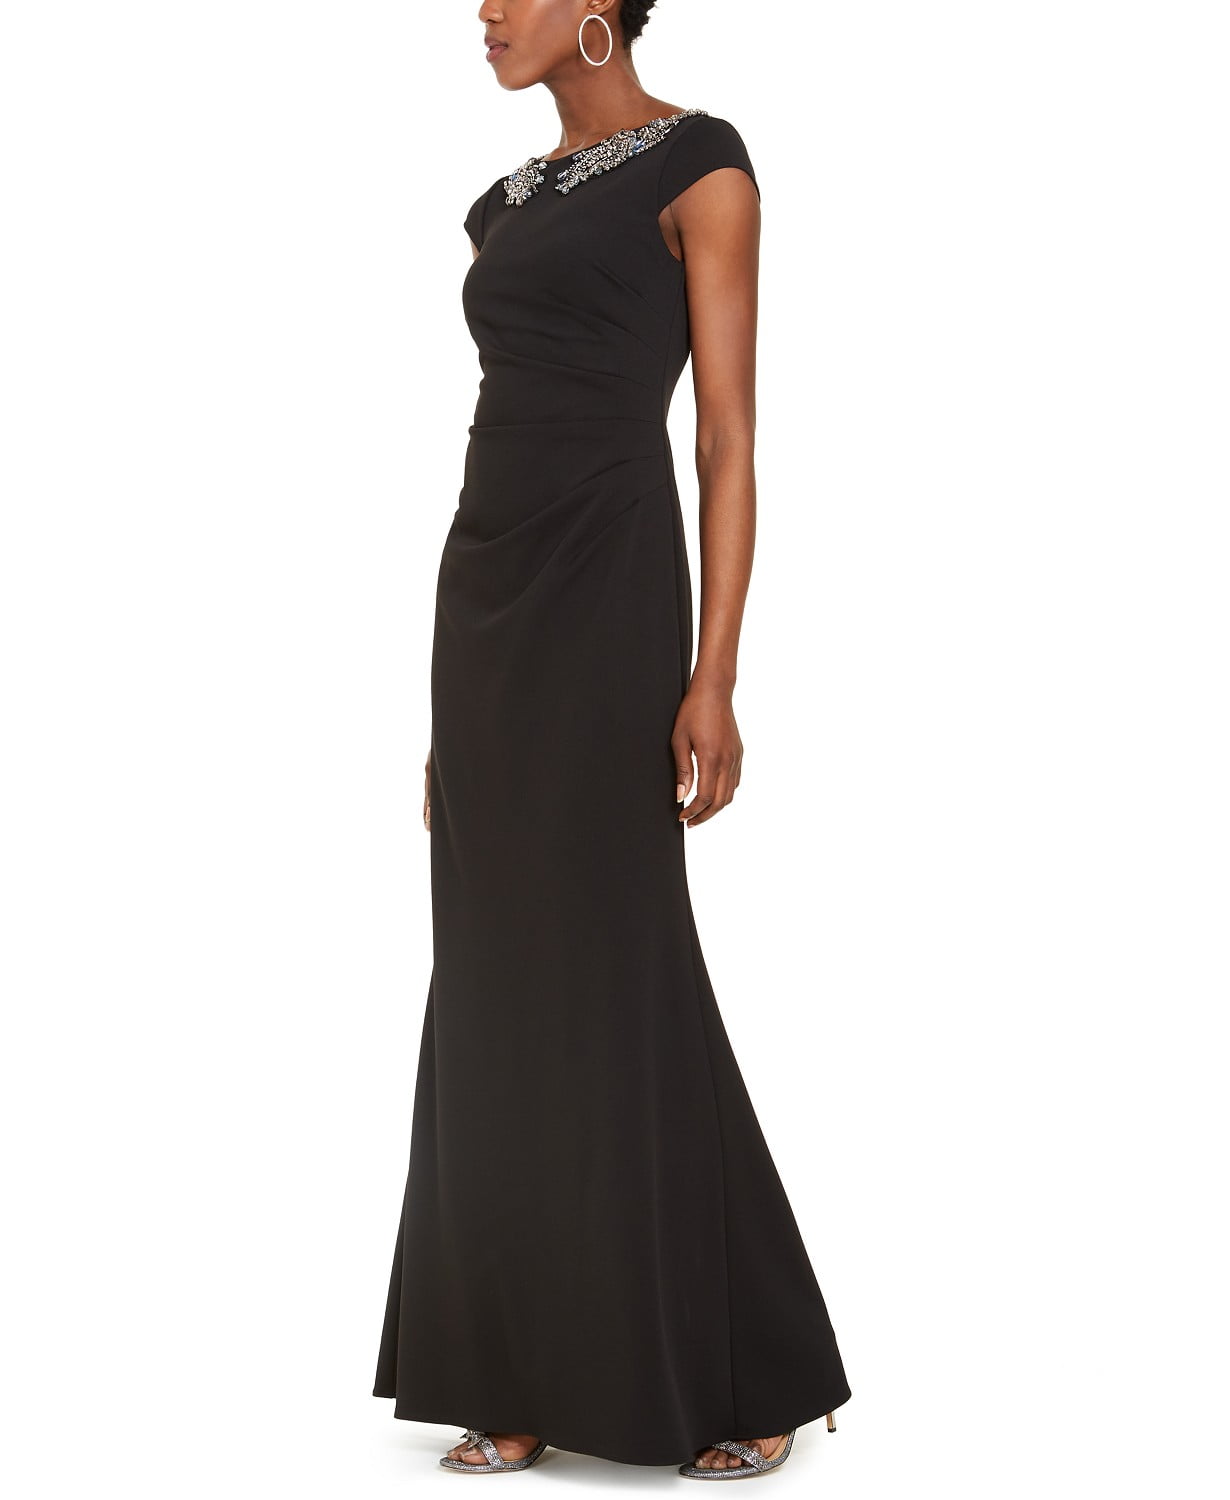 woocommerce-673321-2209615.cloudwaysapps.com-adrianna-papell-womens-black-crepe-beaded-gown-dress